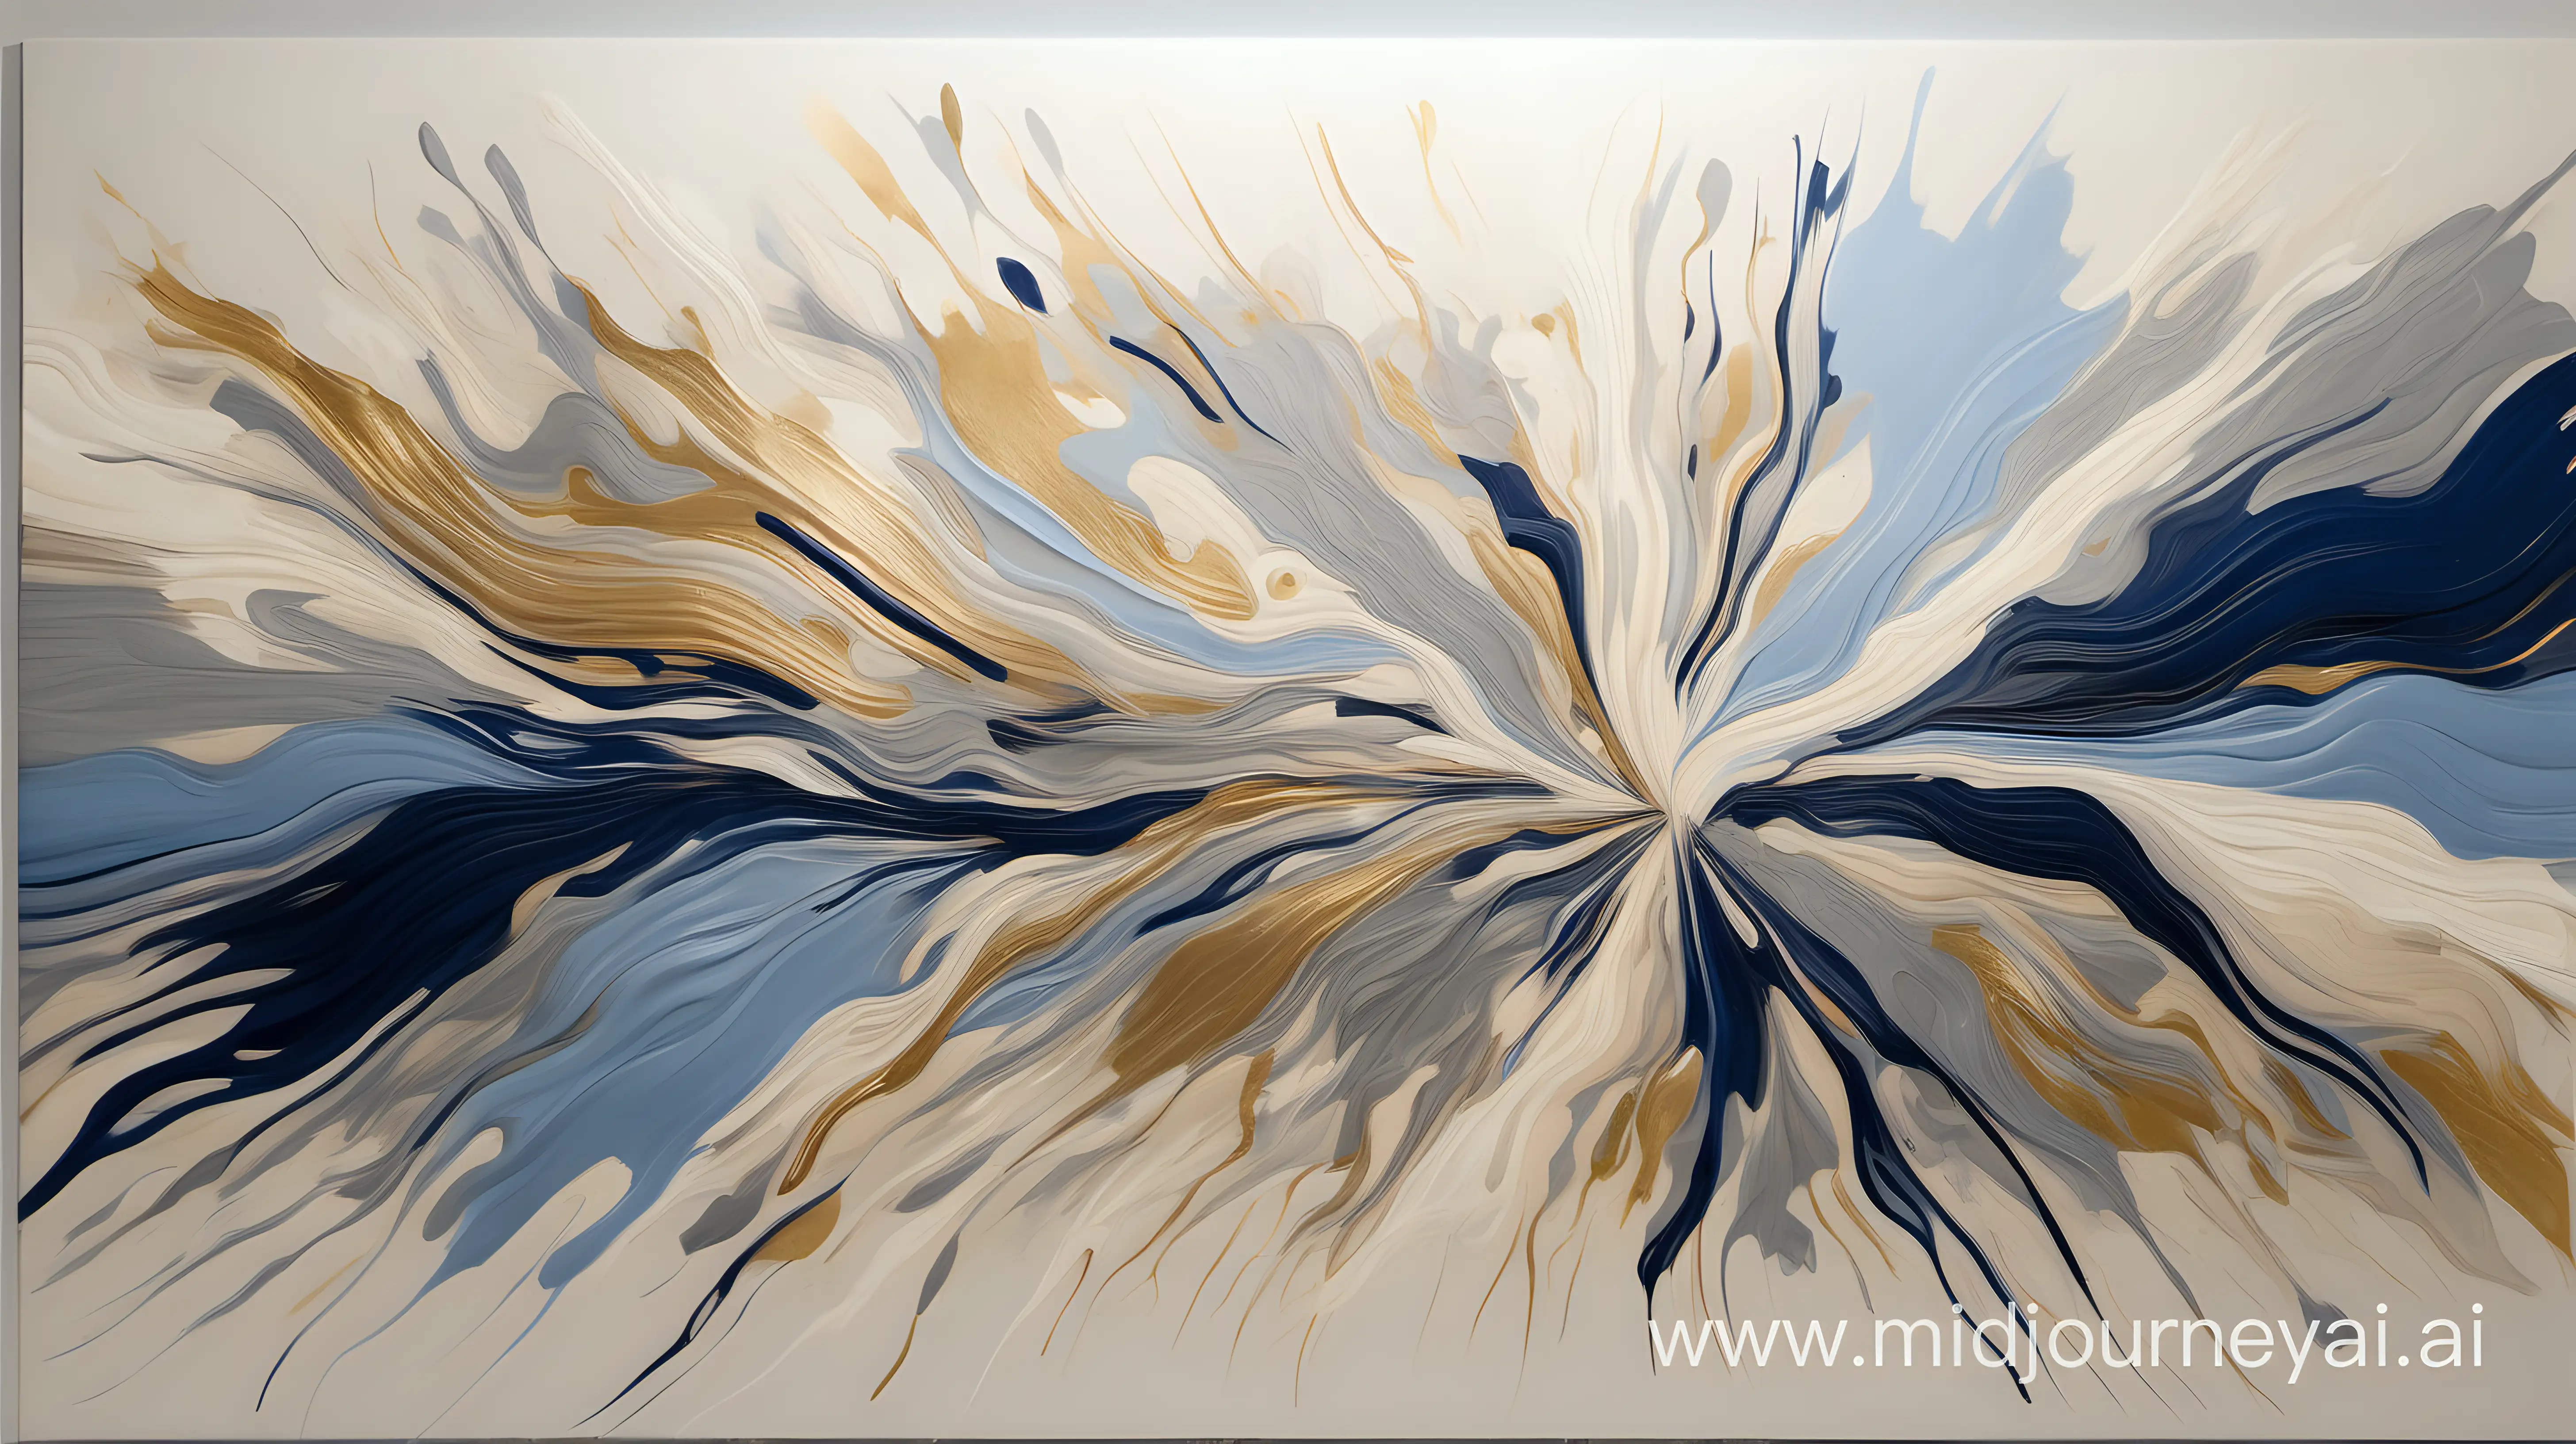 Dynamic Abstract Art Millennial Motion in Biologic Tones